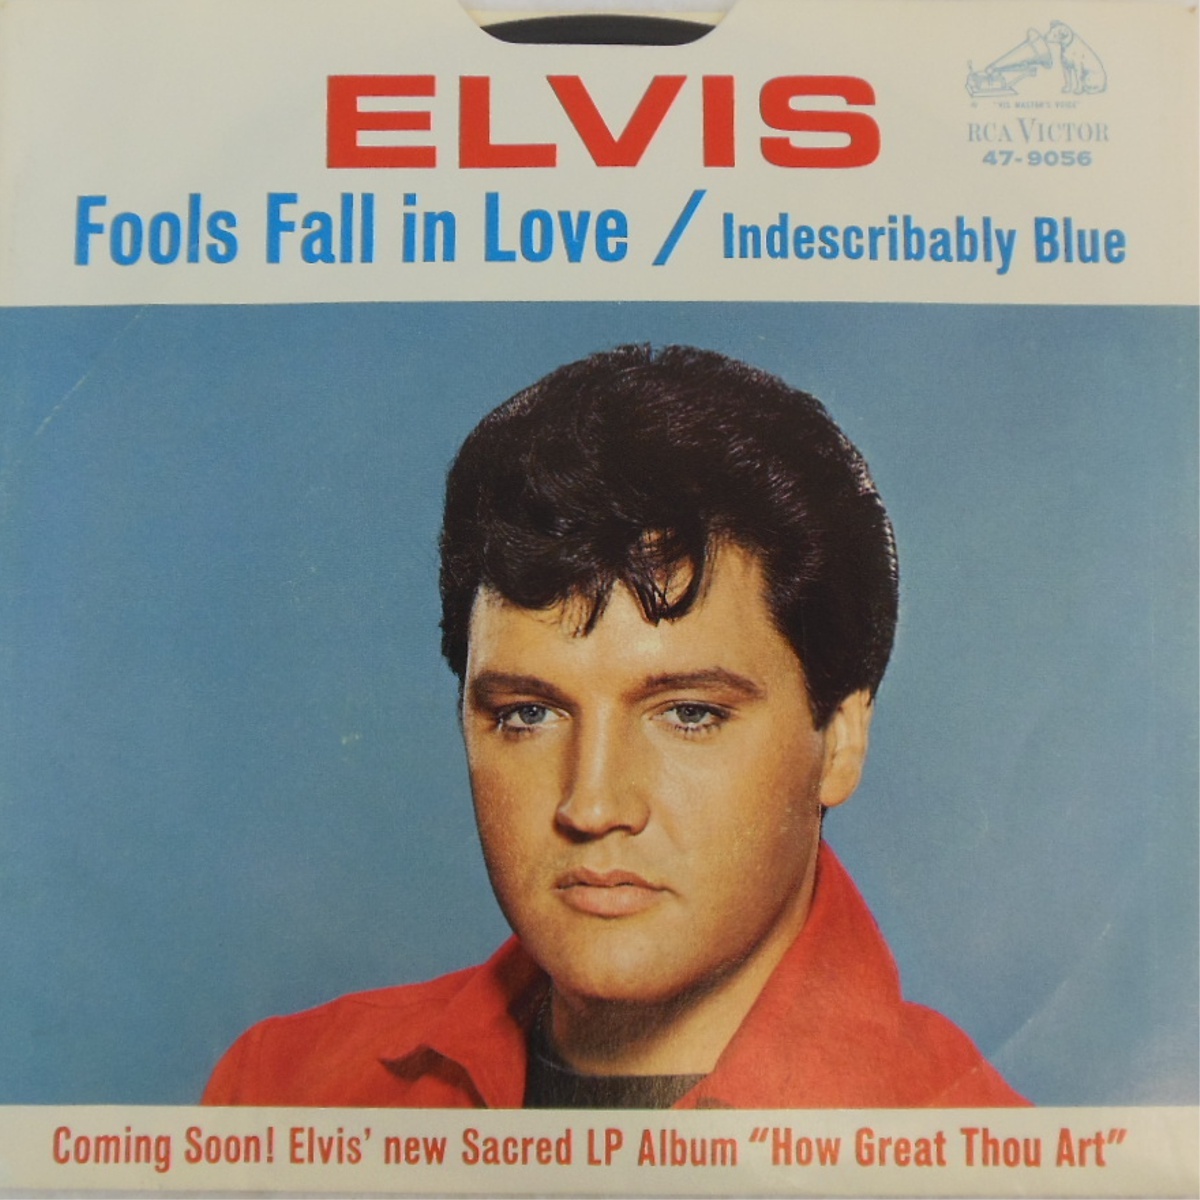 Indescribably Blue / Fools Fall In Love 47-9056ahxcuq